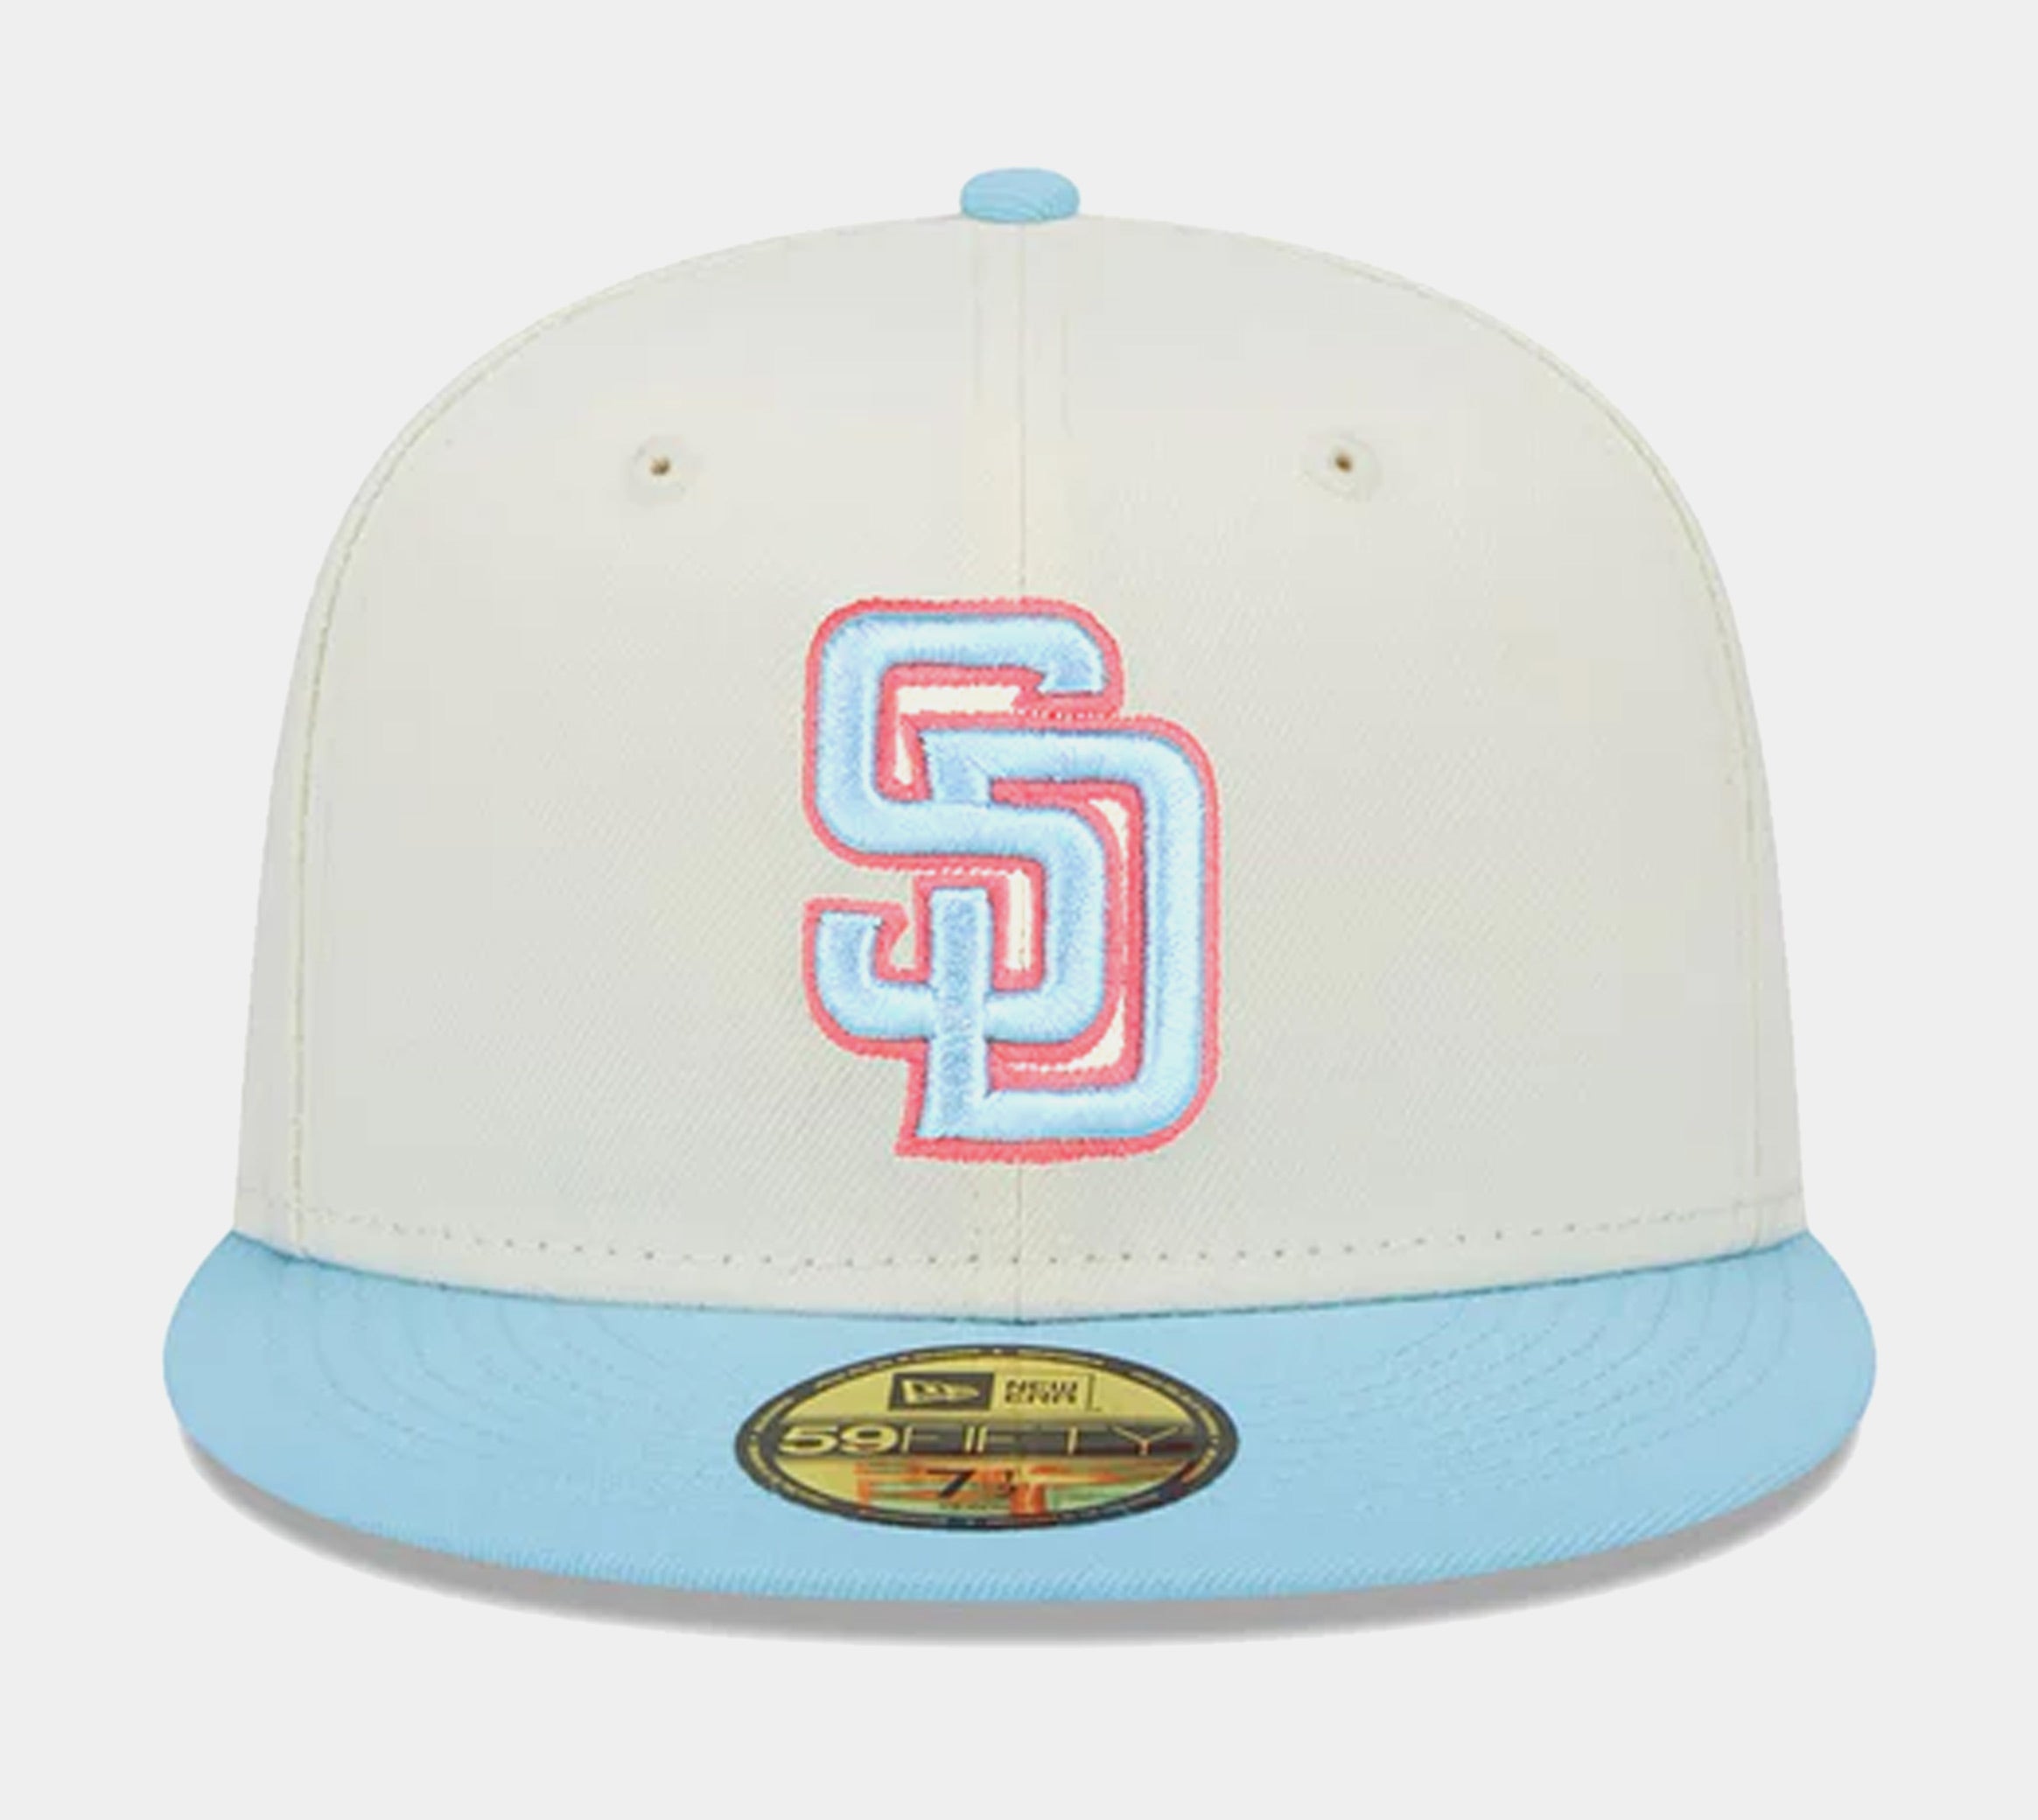 New Era San Diego Padres Colorpack 59Fifty Mens Fitted Hat Blue